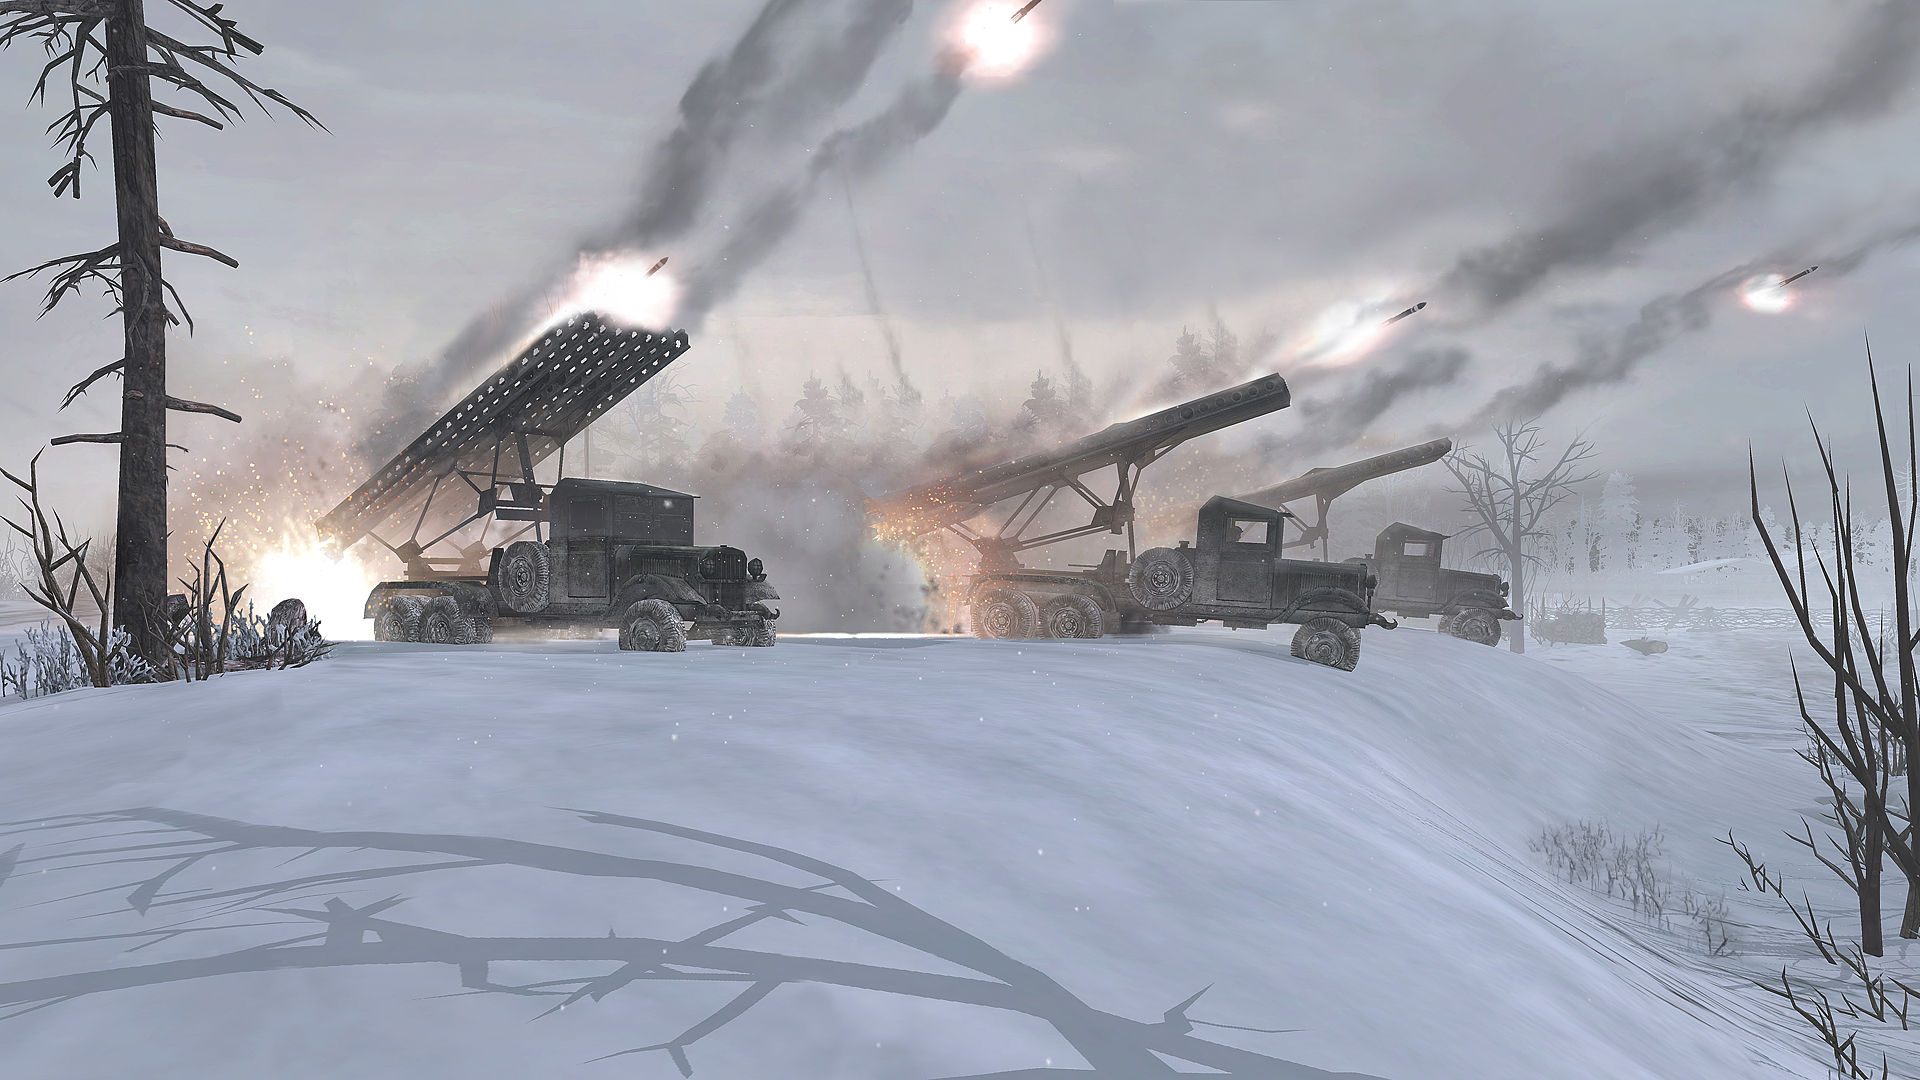 company of heroes 2 free download full game pc